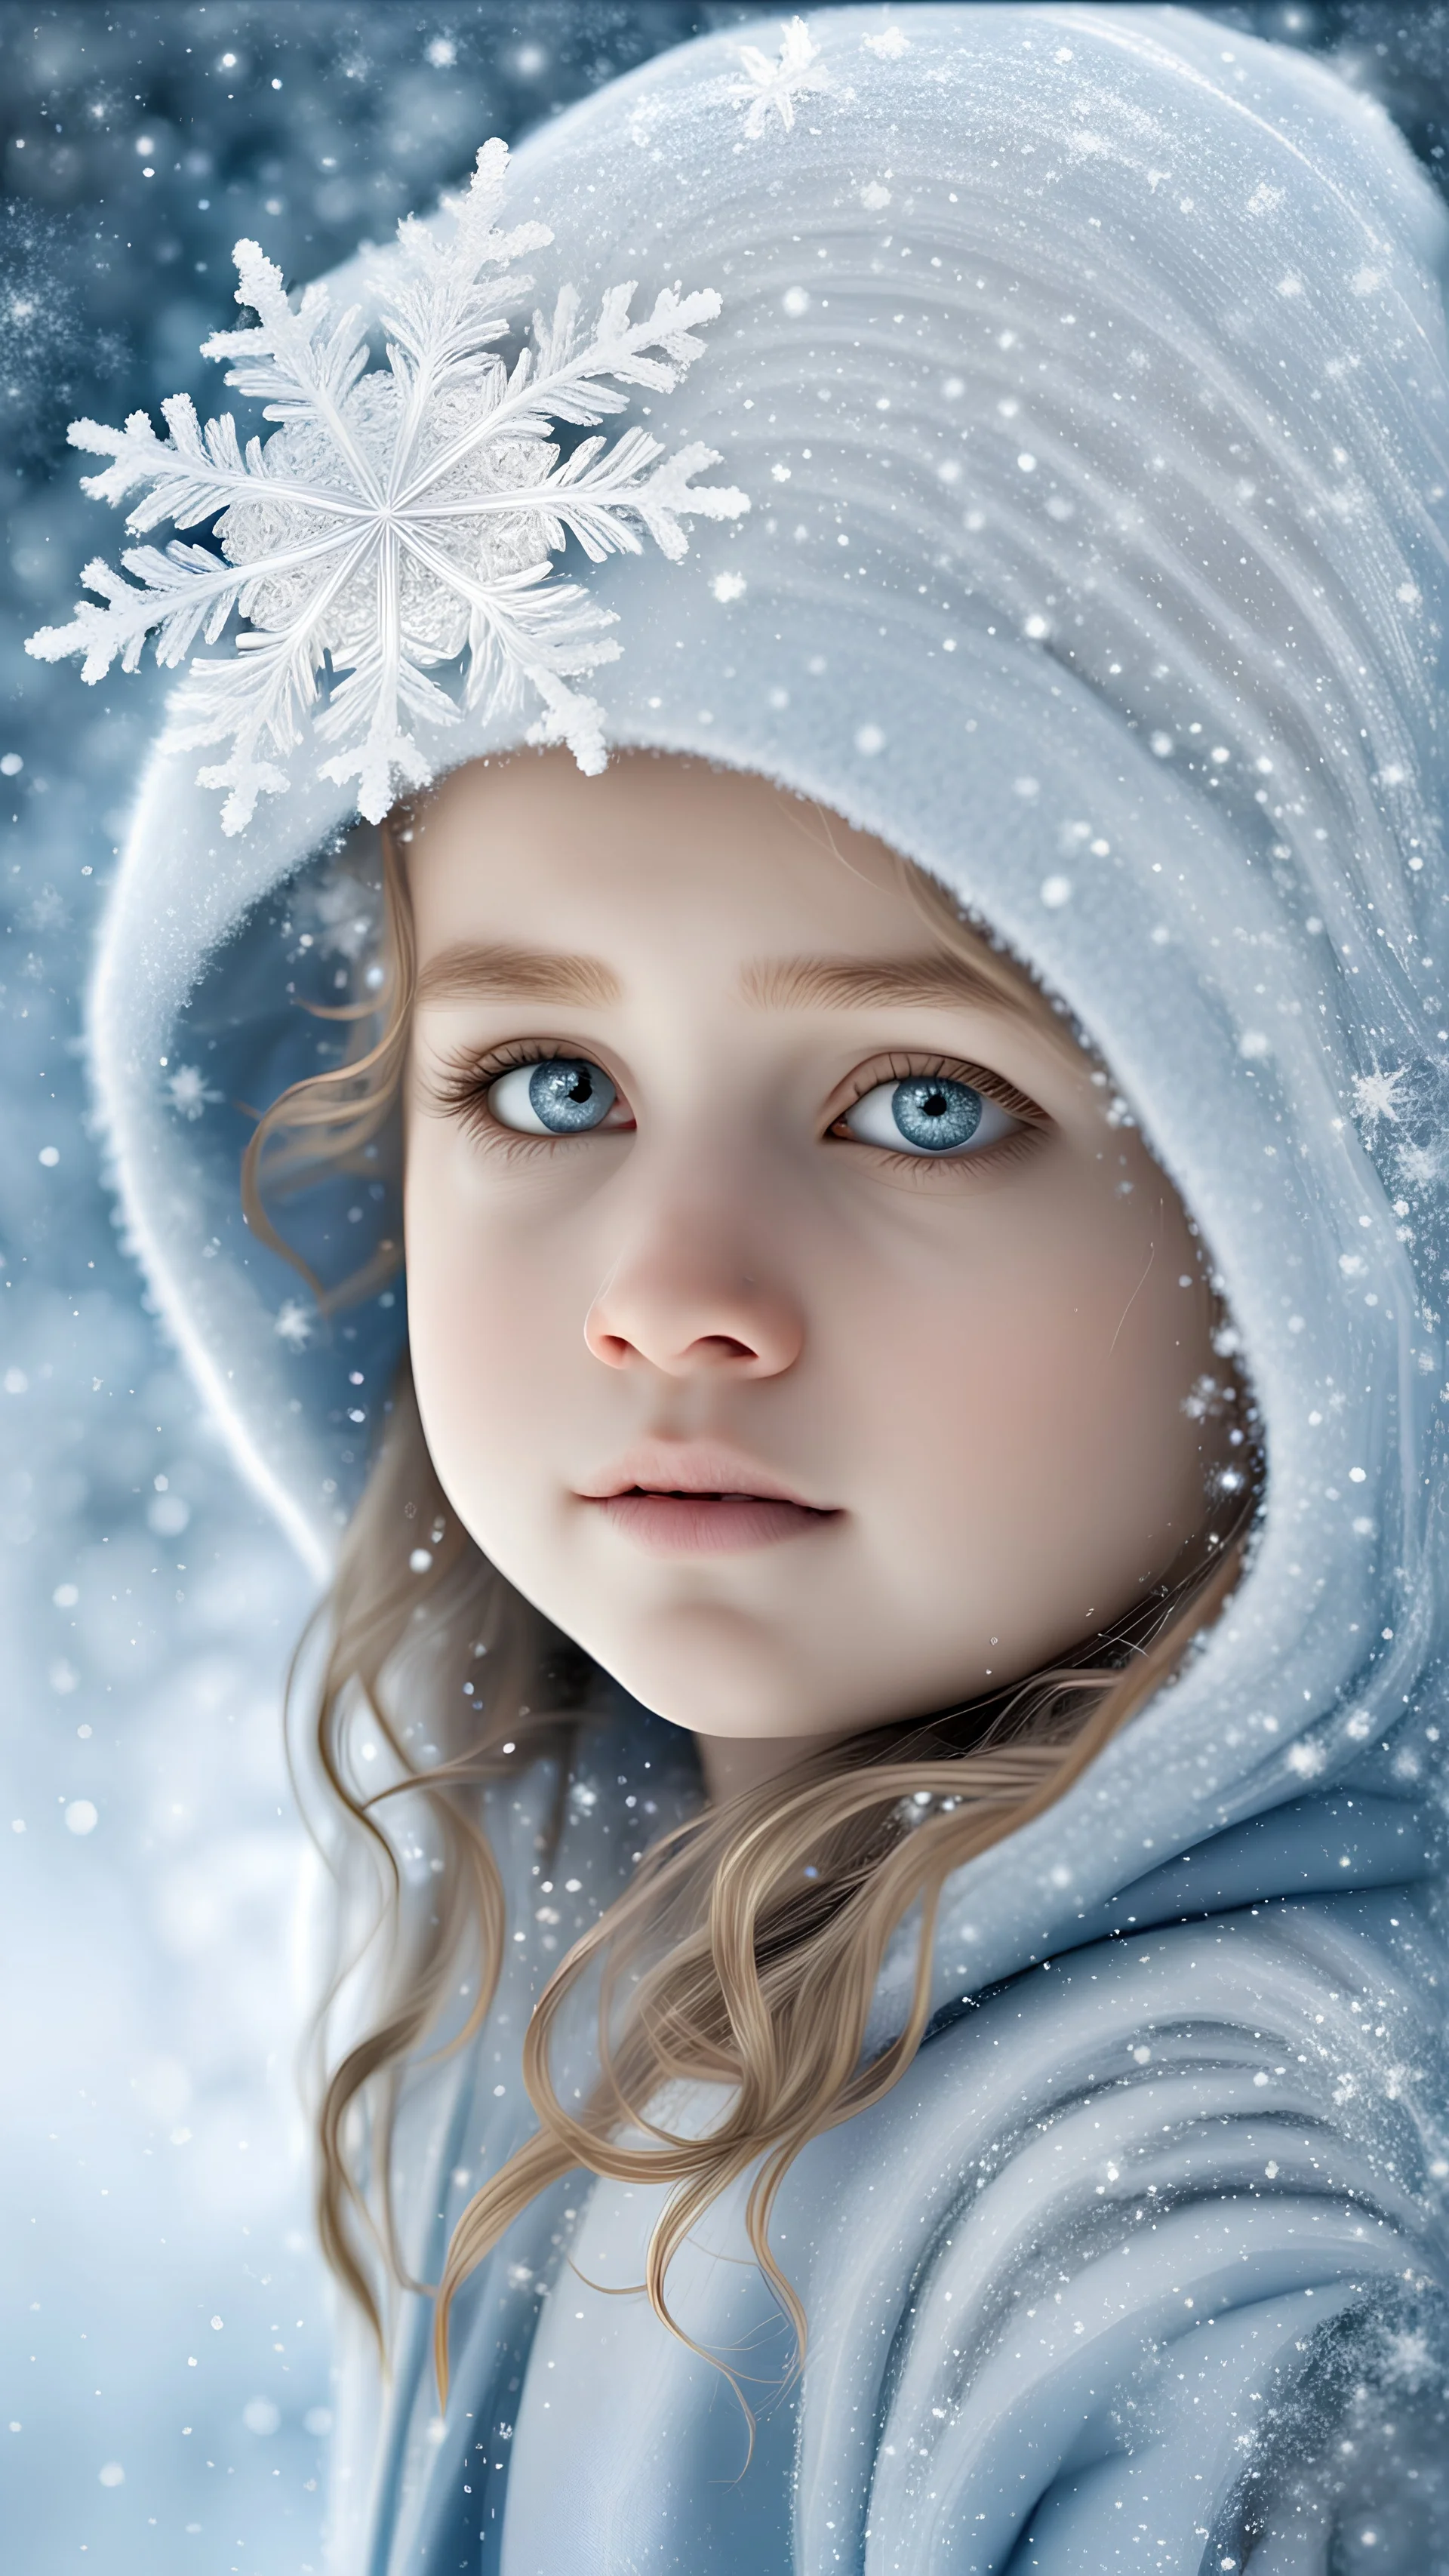 delicate snow hand drawing on the mirror Fibonacci number, fractal of frost, snowflakes and ice, depicts the face of a gorgeous child with very beautiful eyes, incredibly long eyelashes, long hair, fun, magical, festive, 8k, glitter @vint, high resolution, high detail, 30mm lens, 1/250s, f/2.8, ISO 100, triple exposure, hyper-realistic, hyper-detailed, three-dimensional drawing, vector graphics, 3D, masterpiece, drawing on the mirror with snow ink, frosty, icy floral patterns